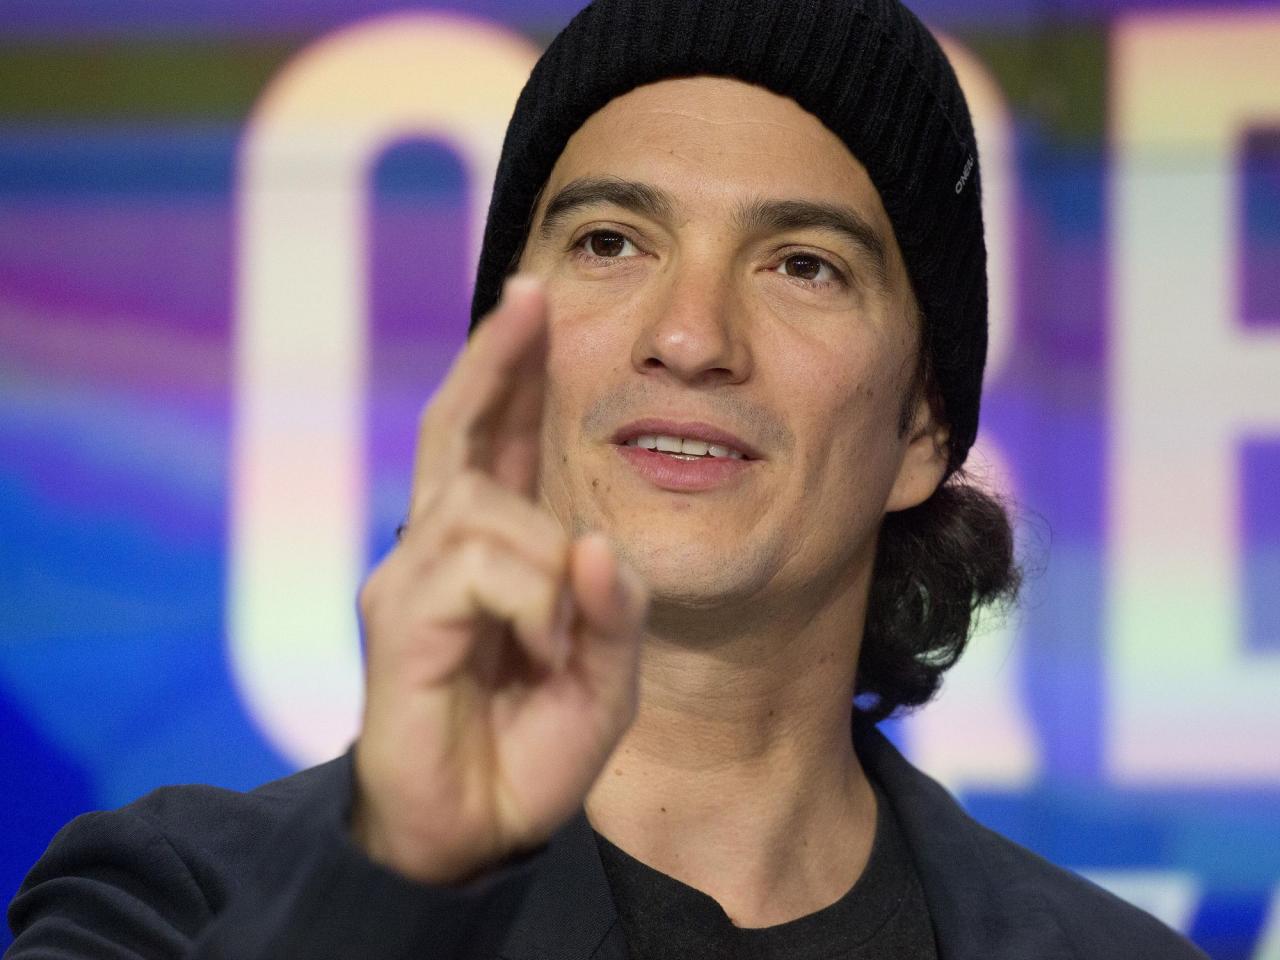 Adam Neumann, the former founder of WeWork who was removed from his position, is interested in purchasing the company that specializes in shared office spaces.